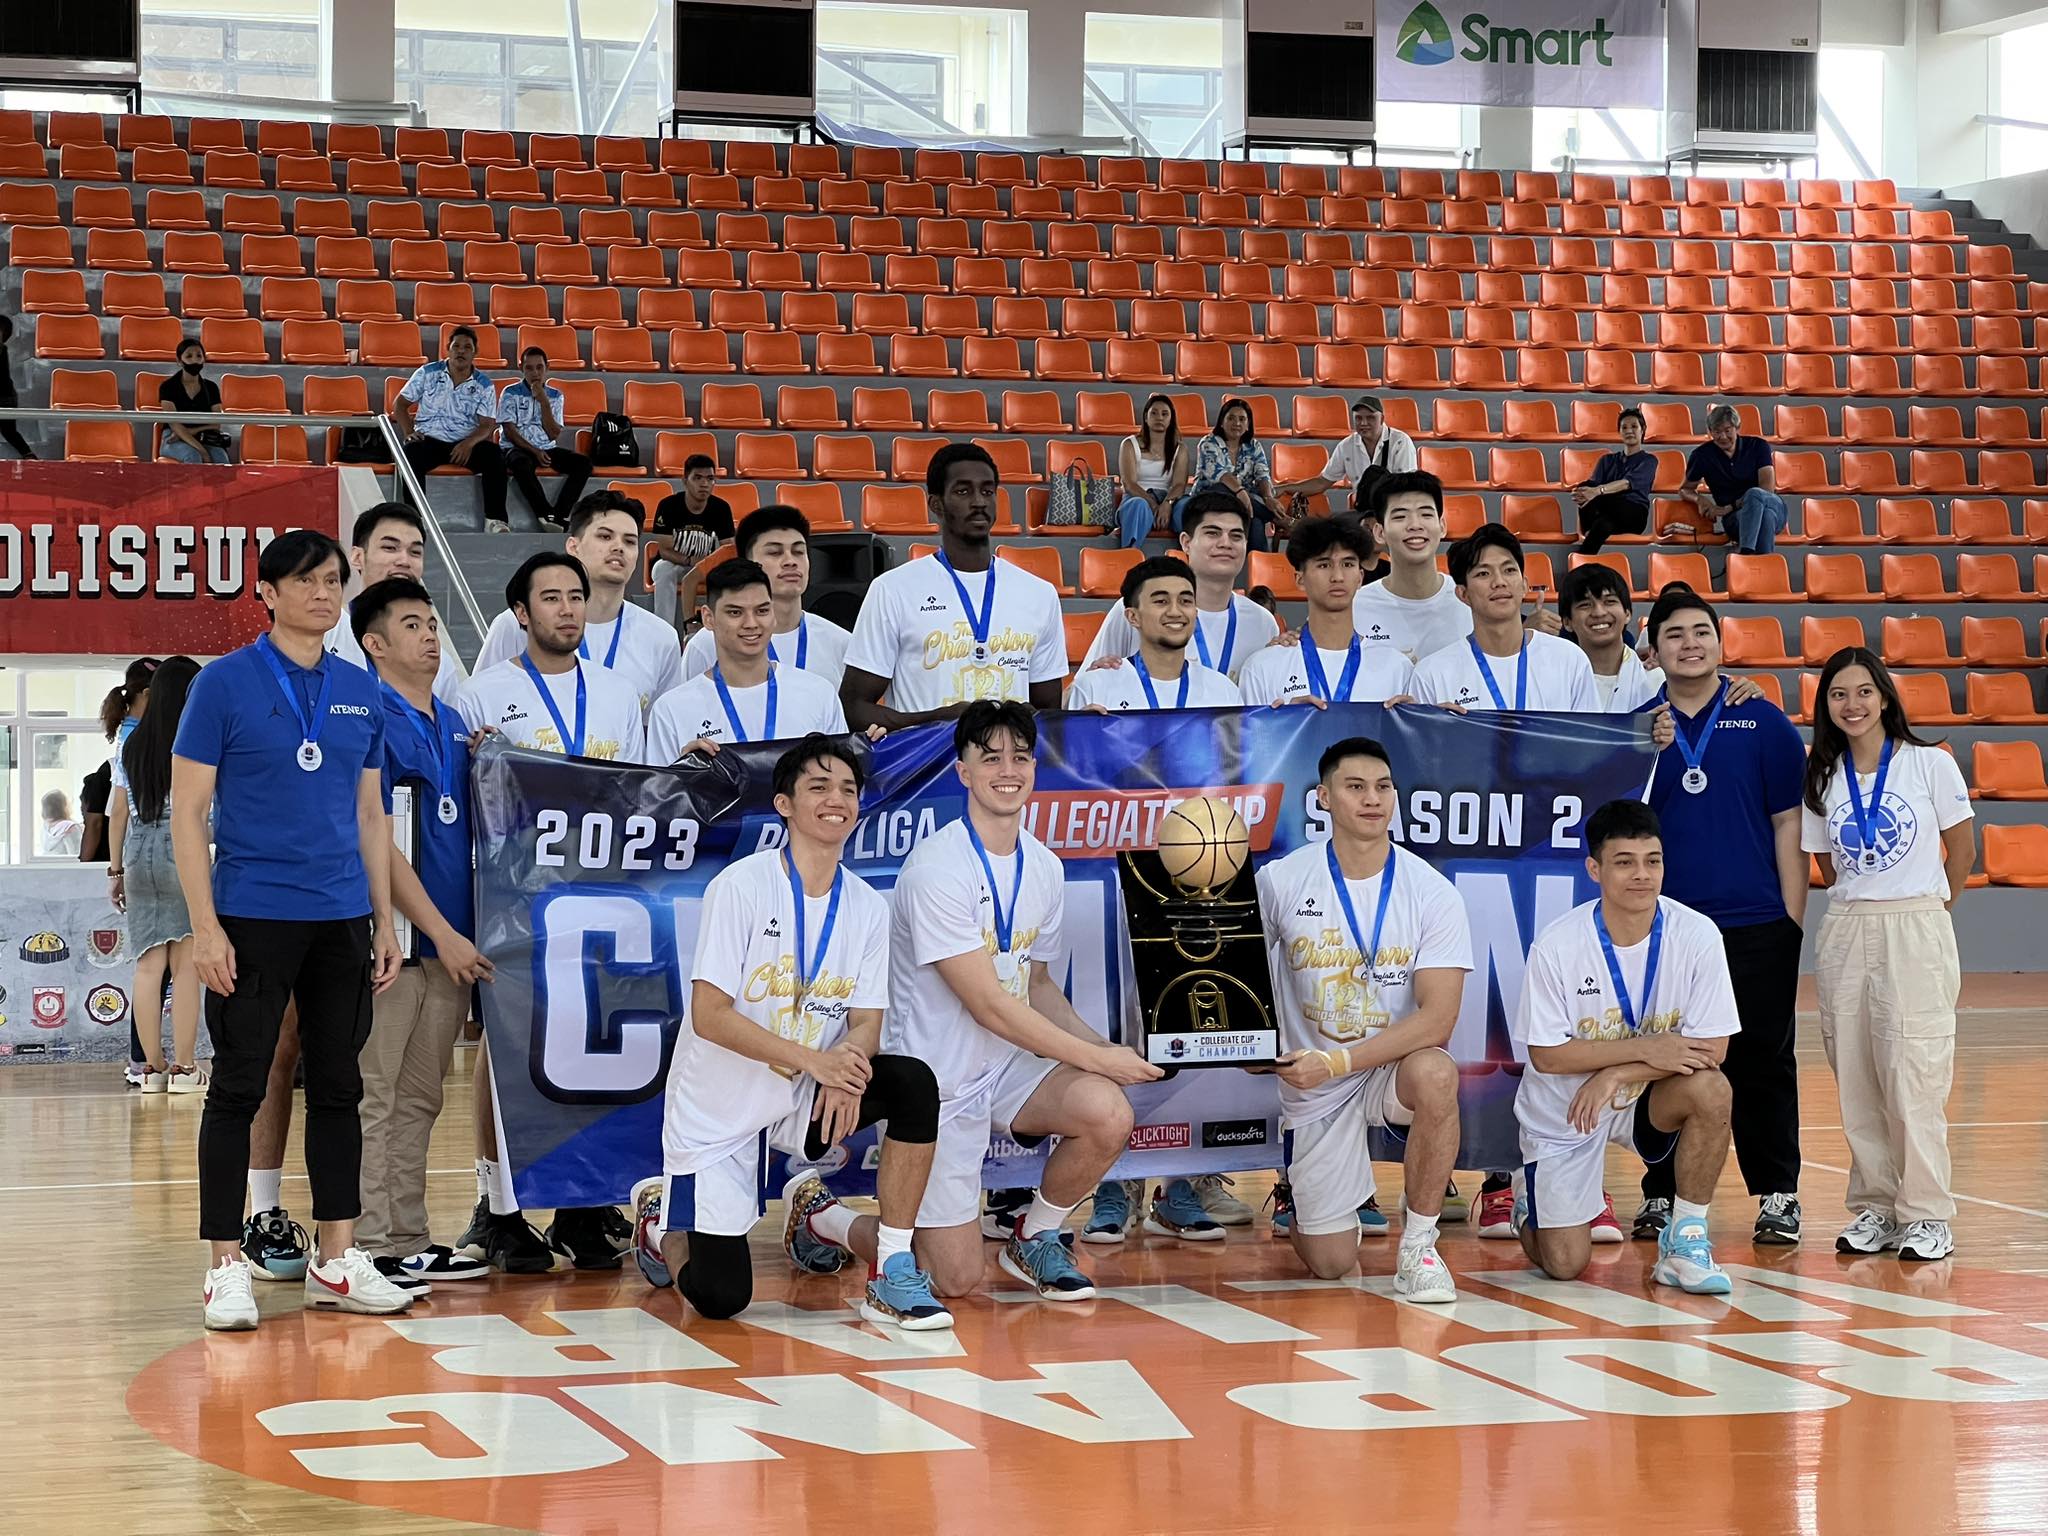 Ateneo Blue Eagles crowned champions in the 2nd Pinoyliga Collegiate Cup